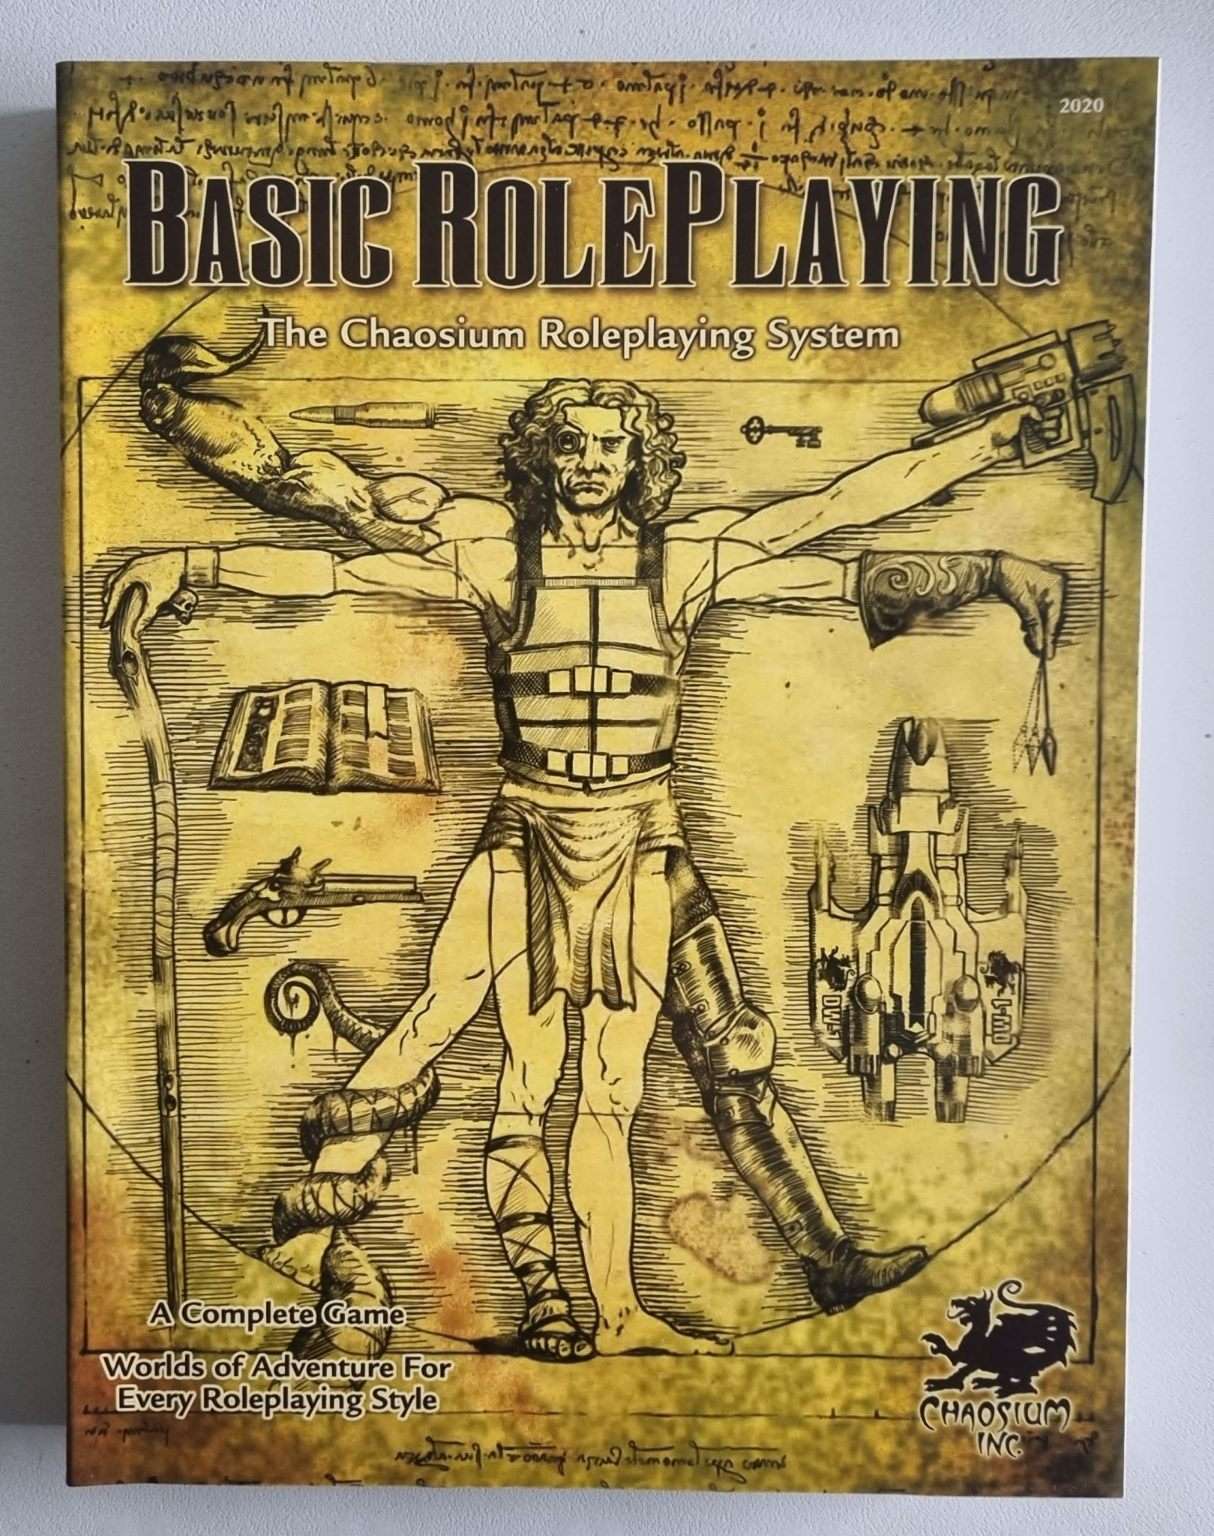 Basic Roleplaying - The Chaosium Roleplaying System